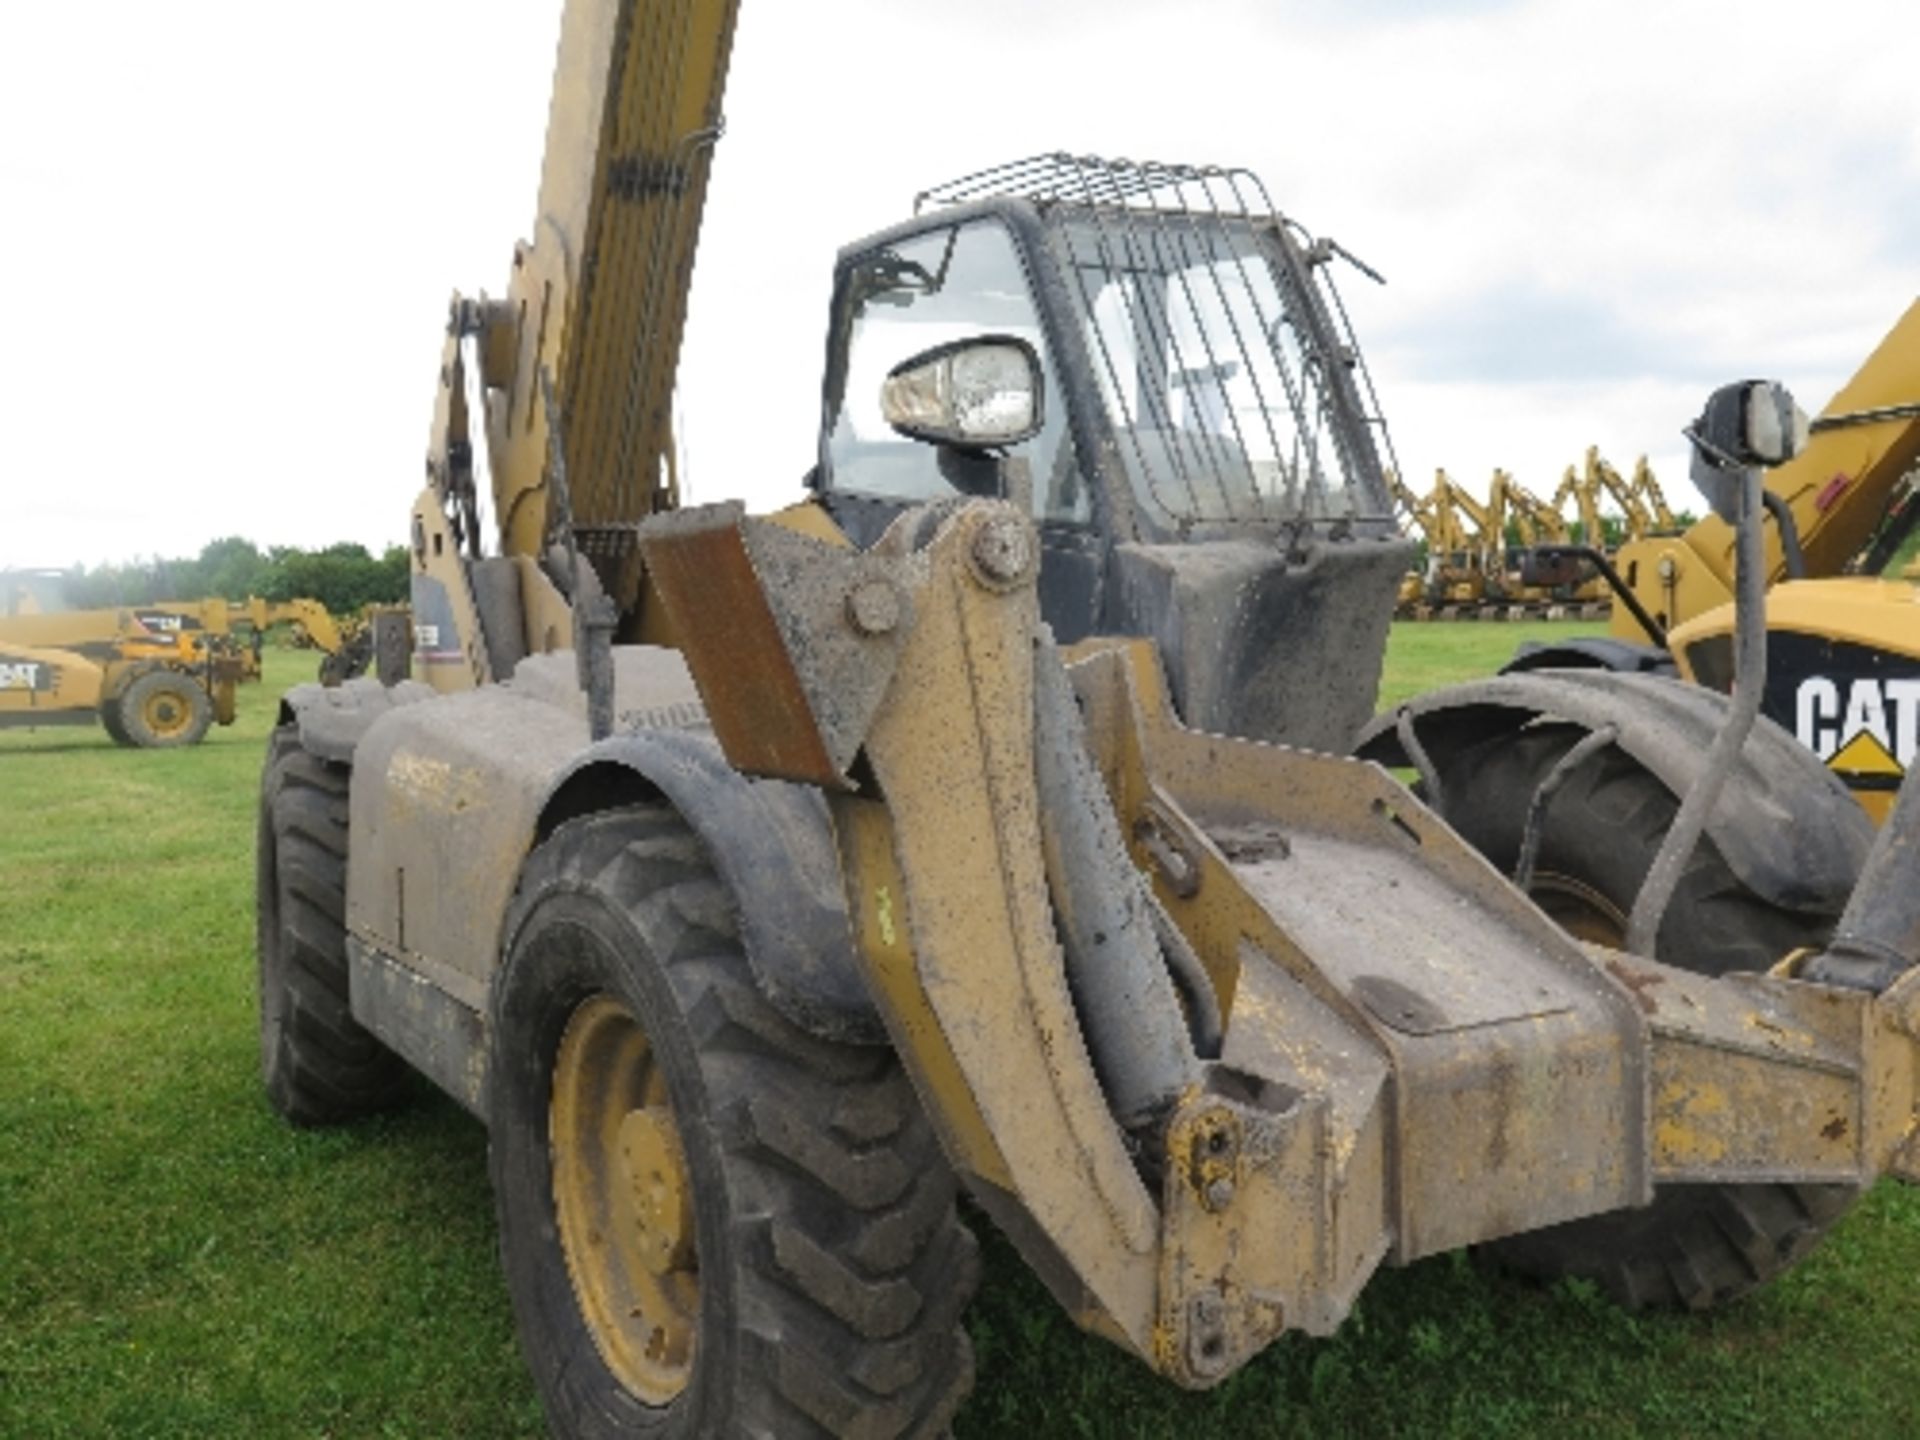 Caterpillar TH580B telehandler 7061 hrs  136316
BELIEVED 2005
POOR COSMETICS
ALL LOTS are SOLD AS - Image 2 of 8